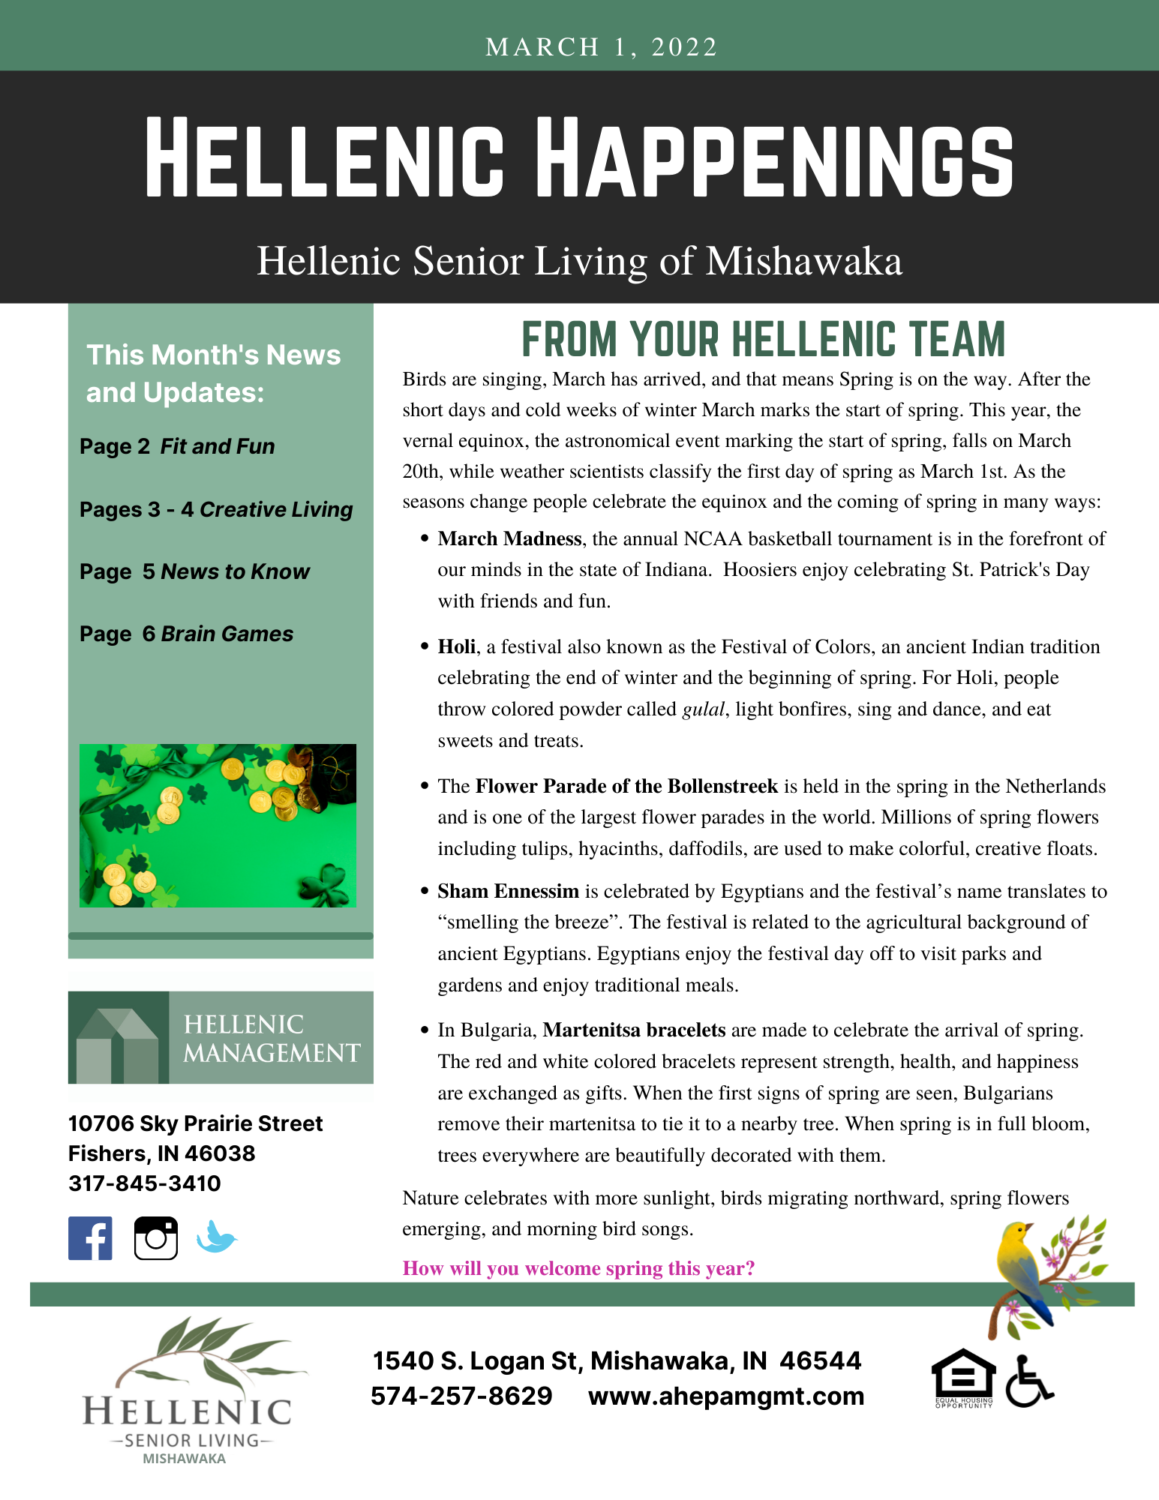 Hellenic Happenings March 2022 Newsletter, page 1